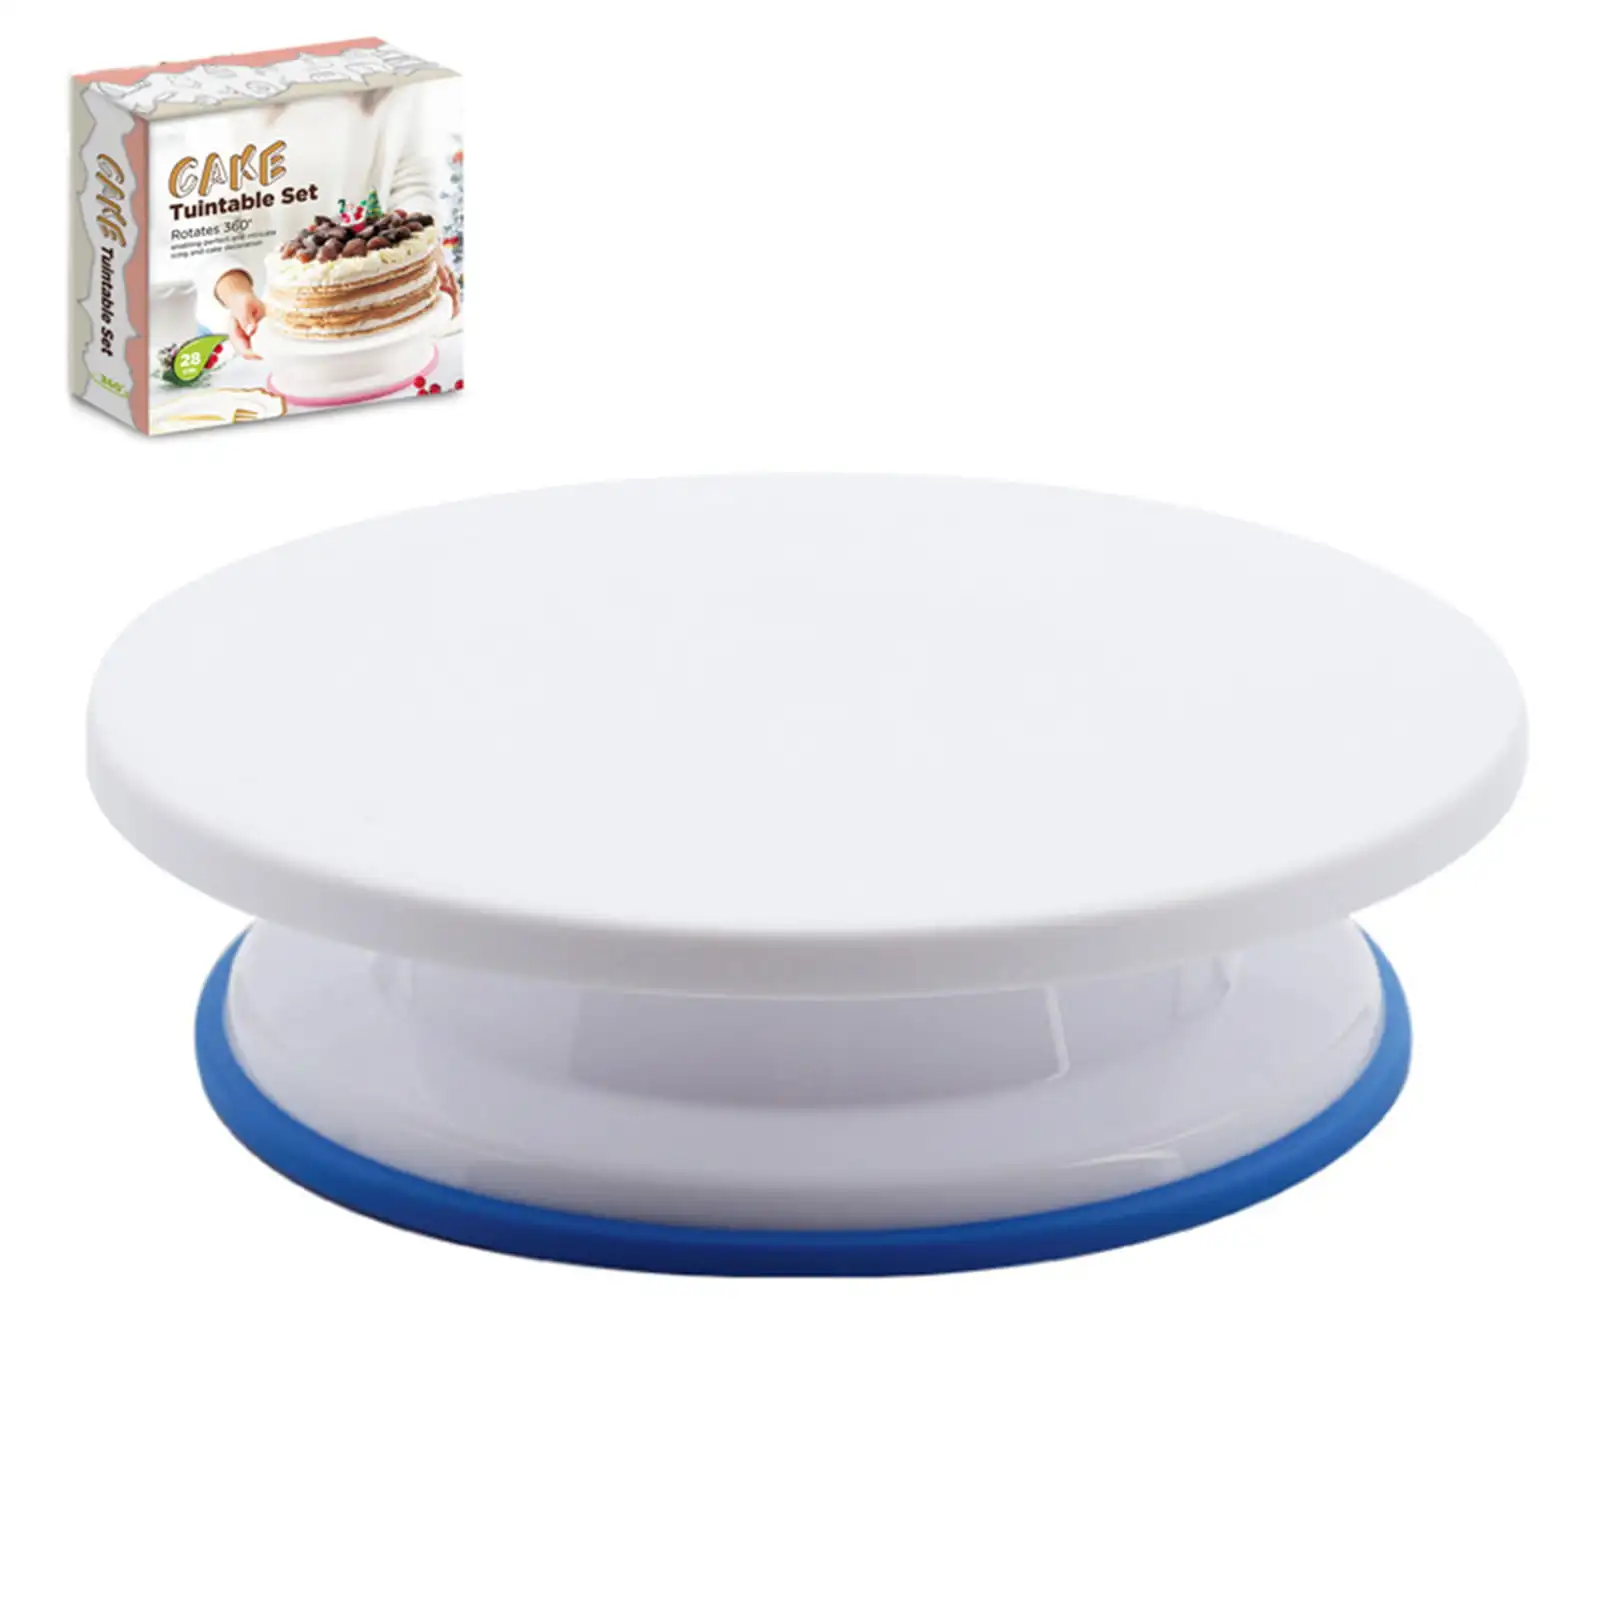 

Cake Stand 12 Inches Cake Turntable, Cake Spinner, Decorating Display Standble, Easy to use Revolving, Made of Plastic of Food